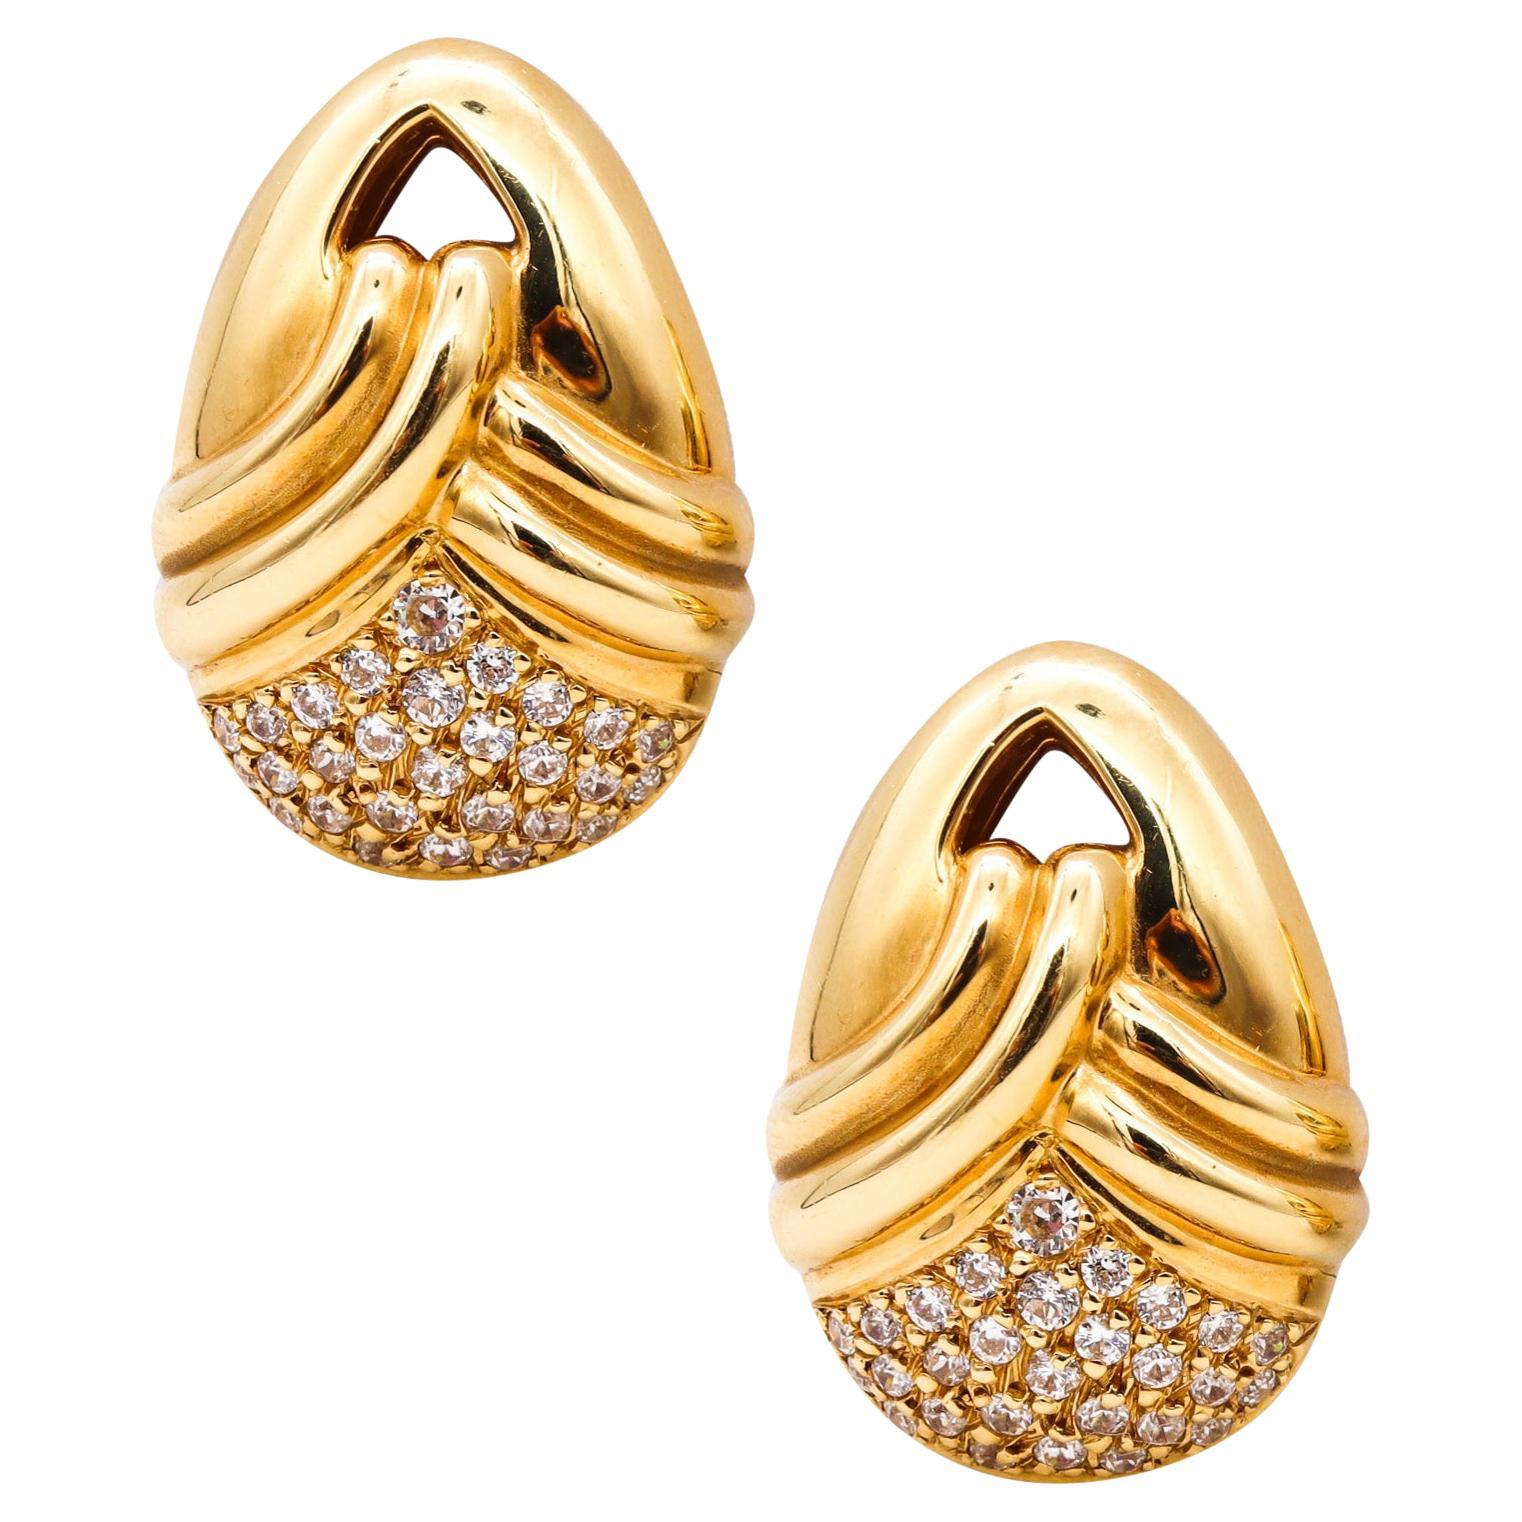 Michael Gates Drapery Clips Earrings Solid 18kt Yellow Gold 1.68 Cts in Diamonds For Sale